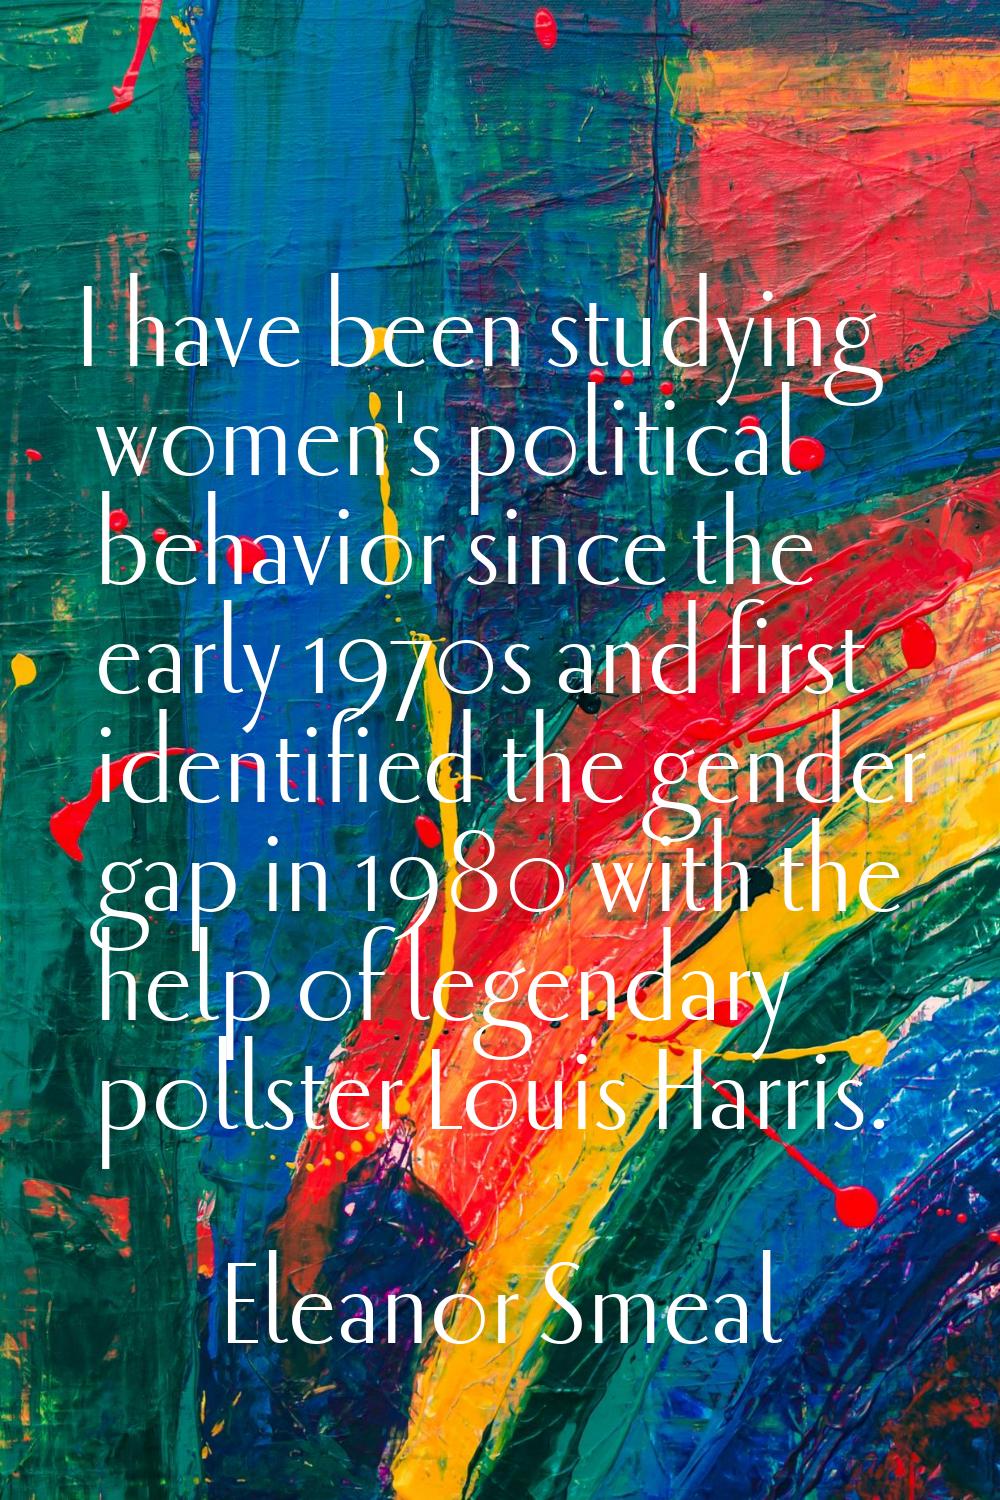 I have been studying women's political behavior since the early 1970s and first identified the gend